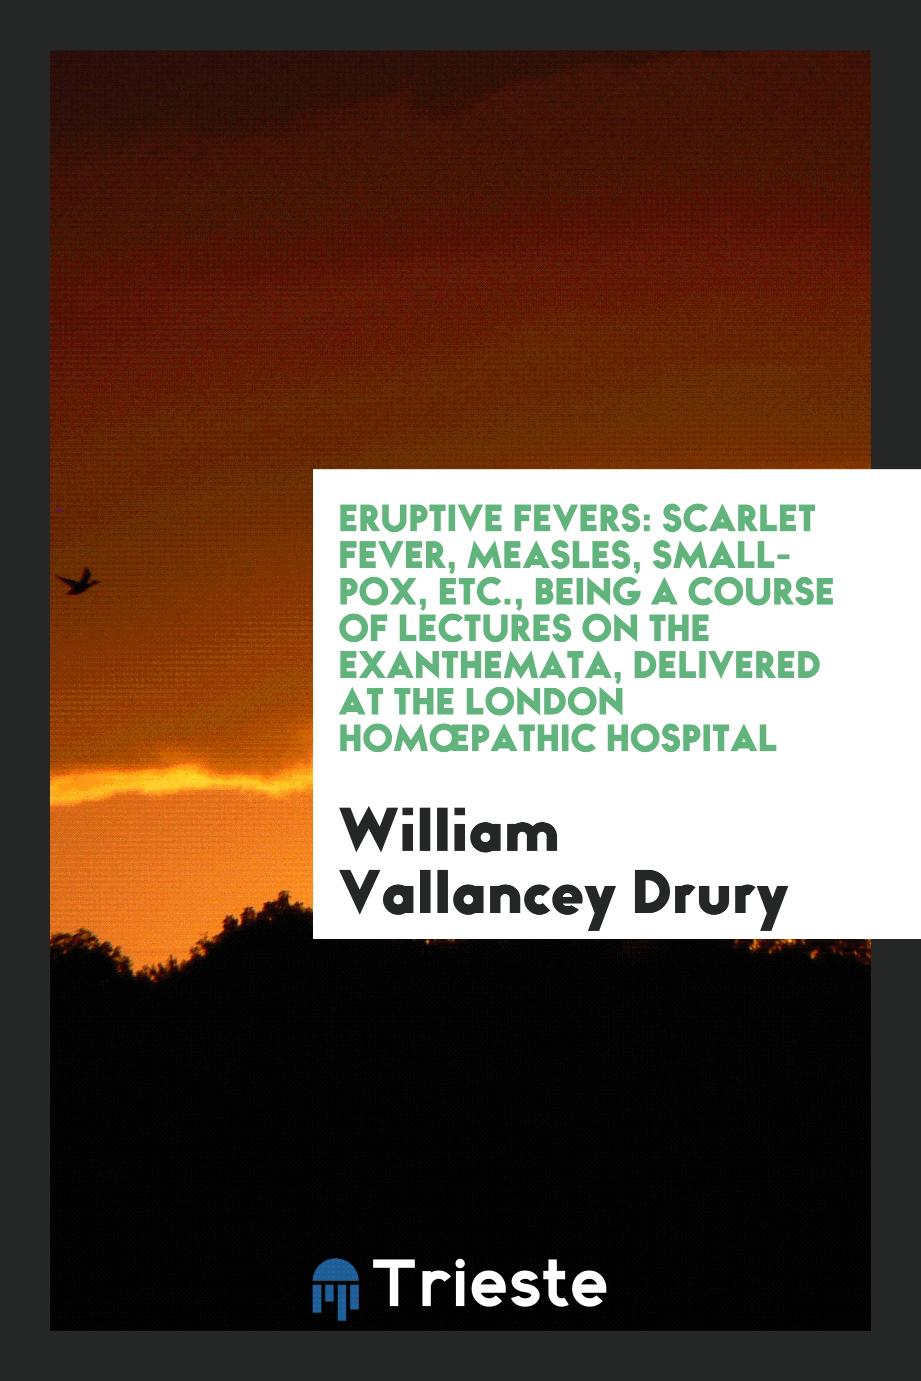 William Vallancey Drury - Eruptive Fevers: Scarlet Fever, Measles, Small-pox, etc., Being a Course of Lectures on the Exanthemata, Delivered at the London Homœpathic Hospital